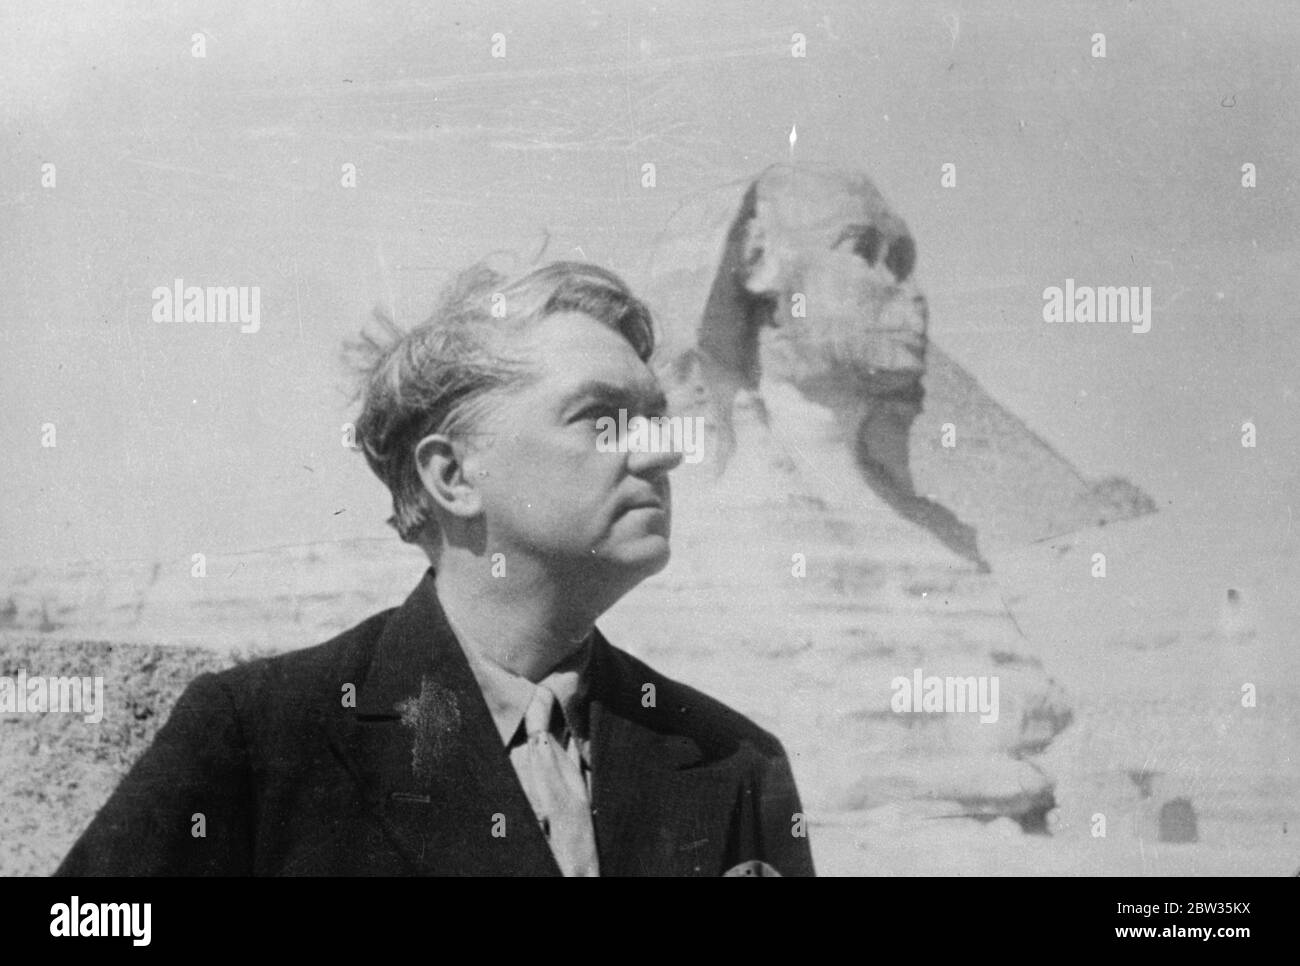 John Drinkwater on vist to egypt inspects the Sphinx . Mr John Drinkwater , the noted English novelist is on a visit to Egypt , and inspected the Spinx , and pyramids during his tour . Mr John Drinkwater beside the Sphinx during his visit to Egypt . 13 March 1933 Stock Photo